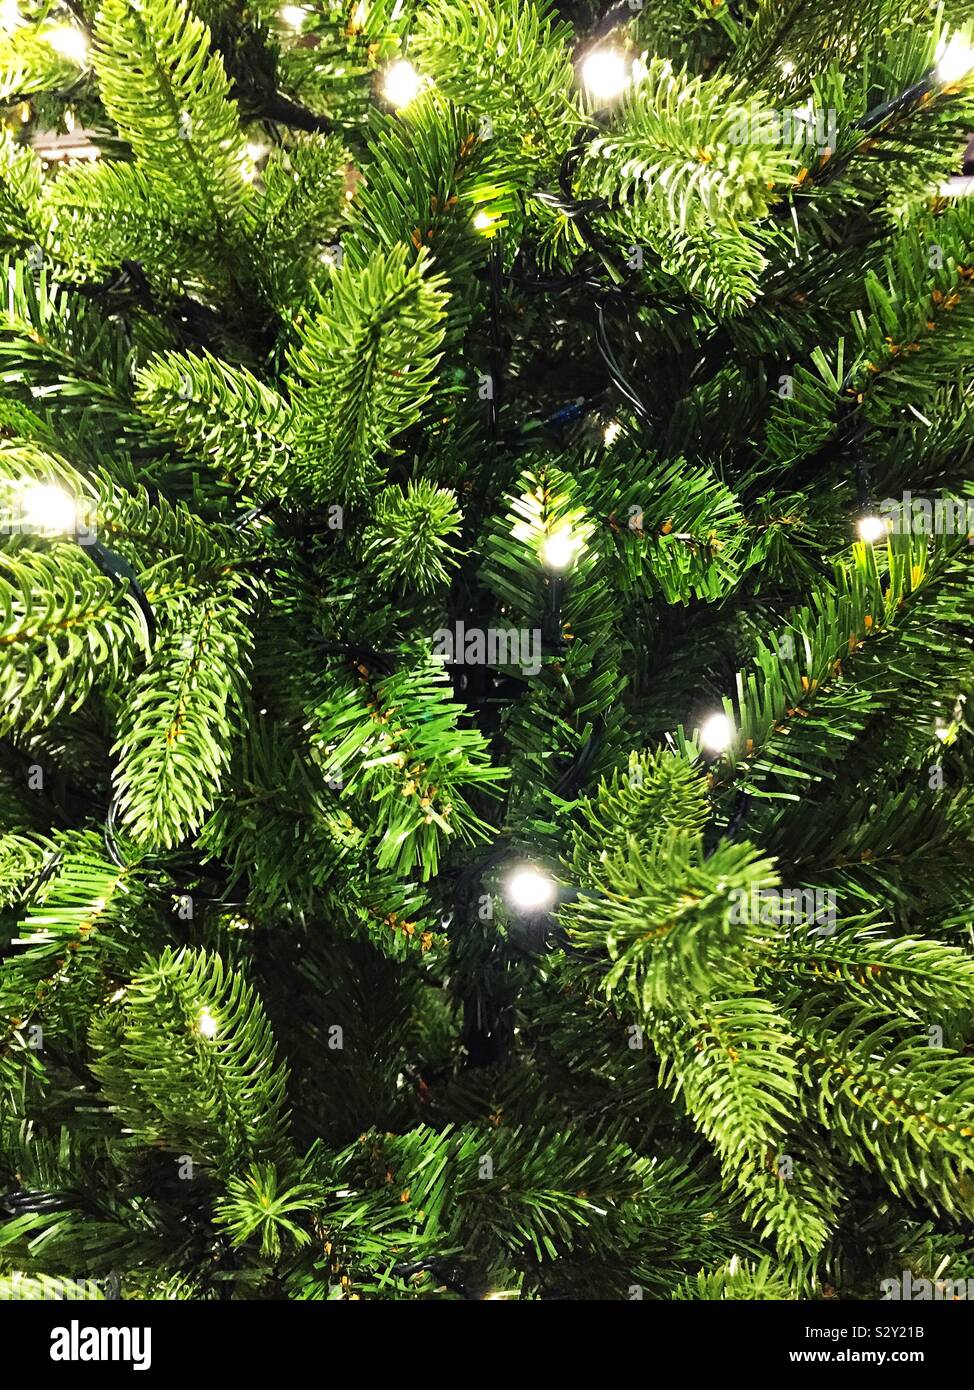 A Christmas background of the green leaves of an Xmas tree with white fairy lights in a full frame festive image with copy space Stock Photo